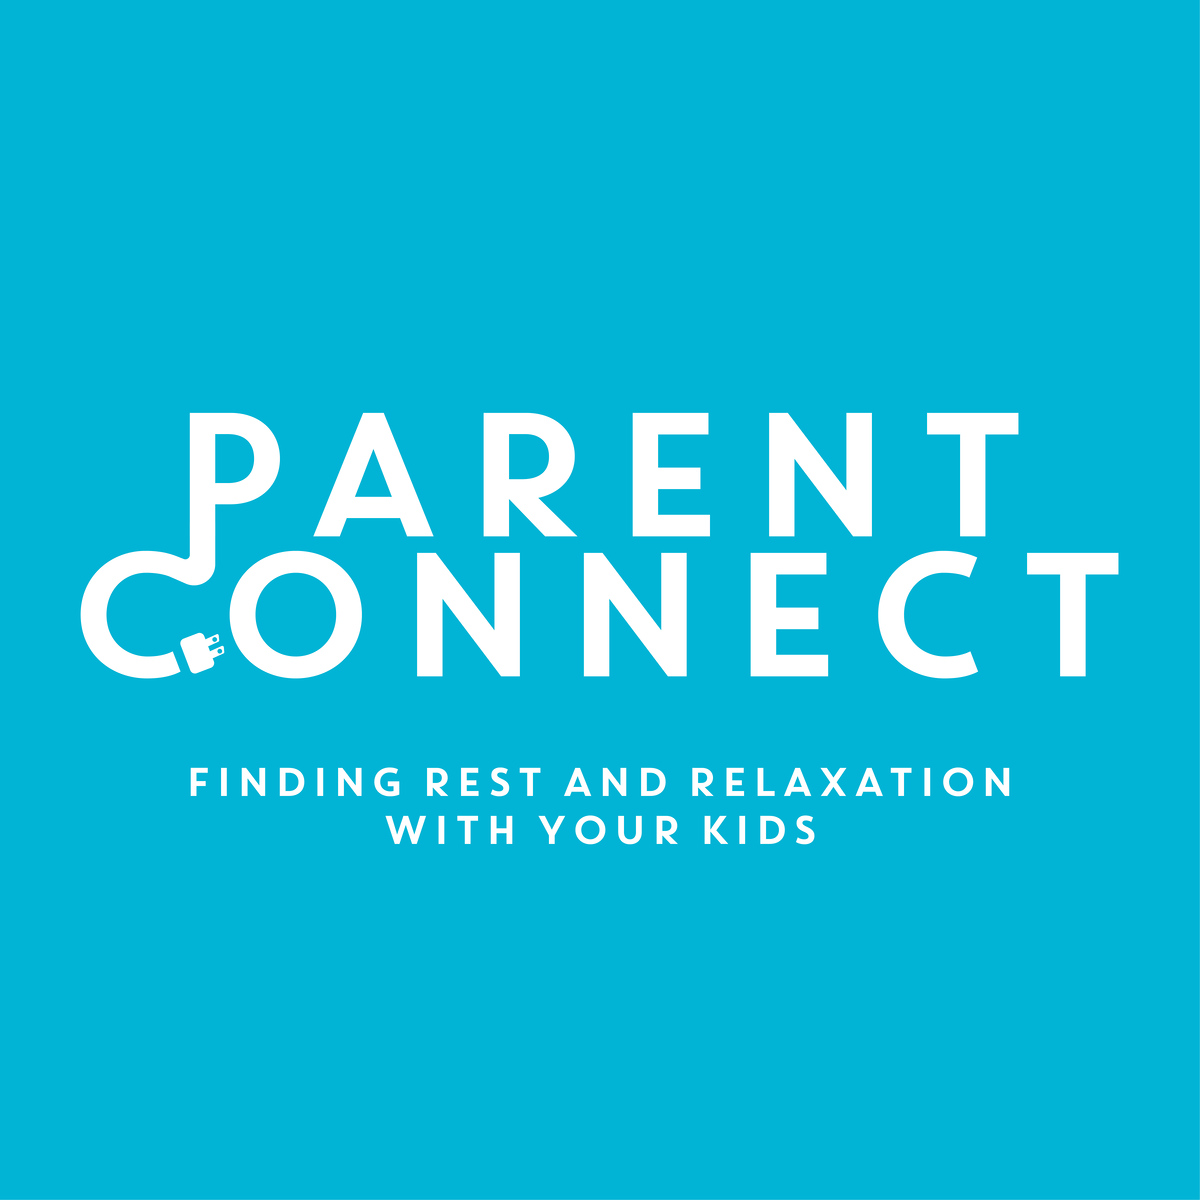 Finding Rest and Relaxation With Your Kids